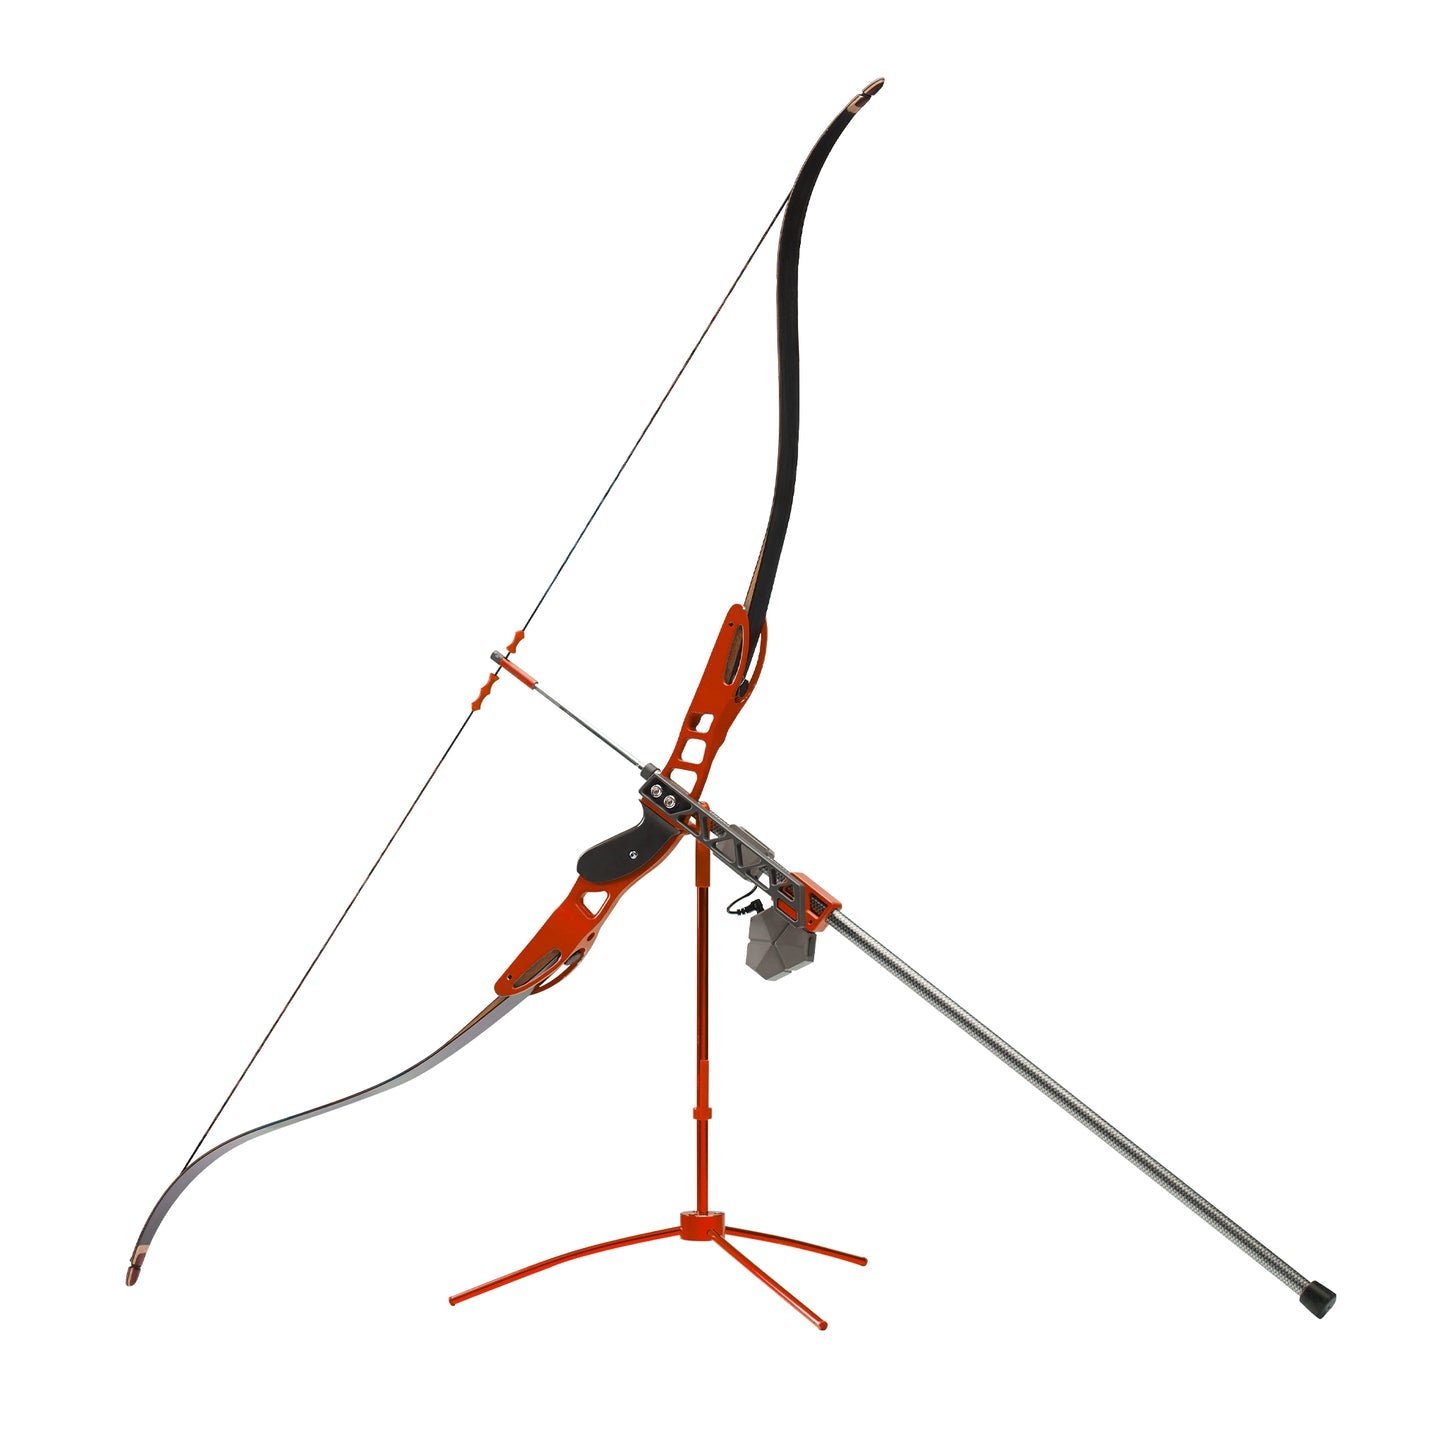 Smart Virtual Archery with Bluetooth for Home, Support Android / iOS-Trainnox